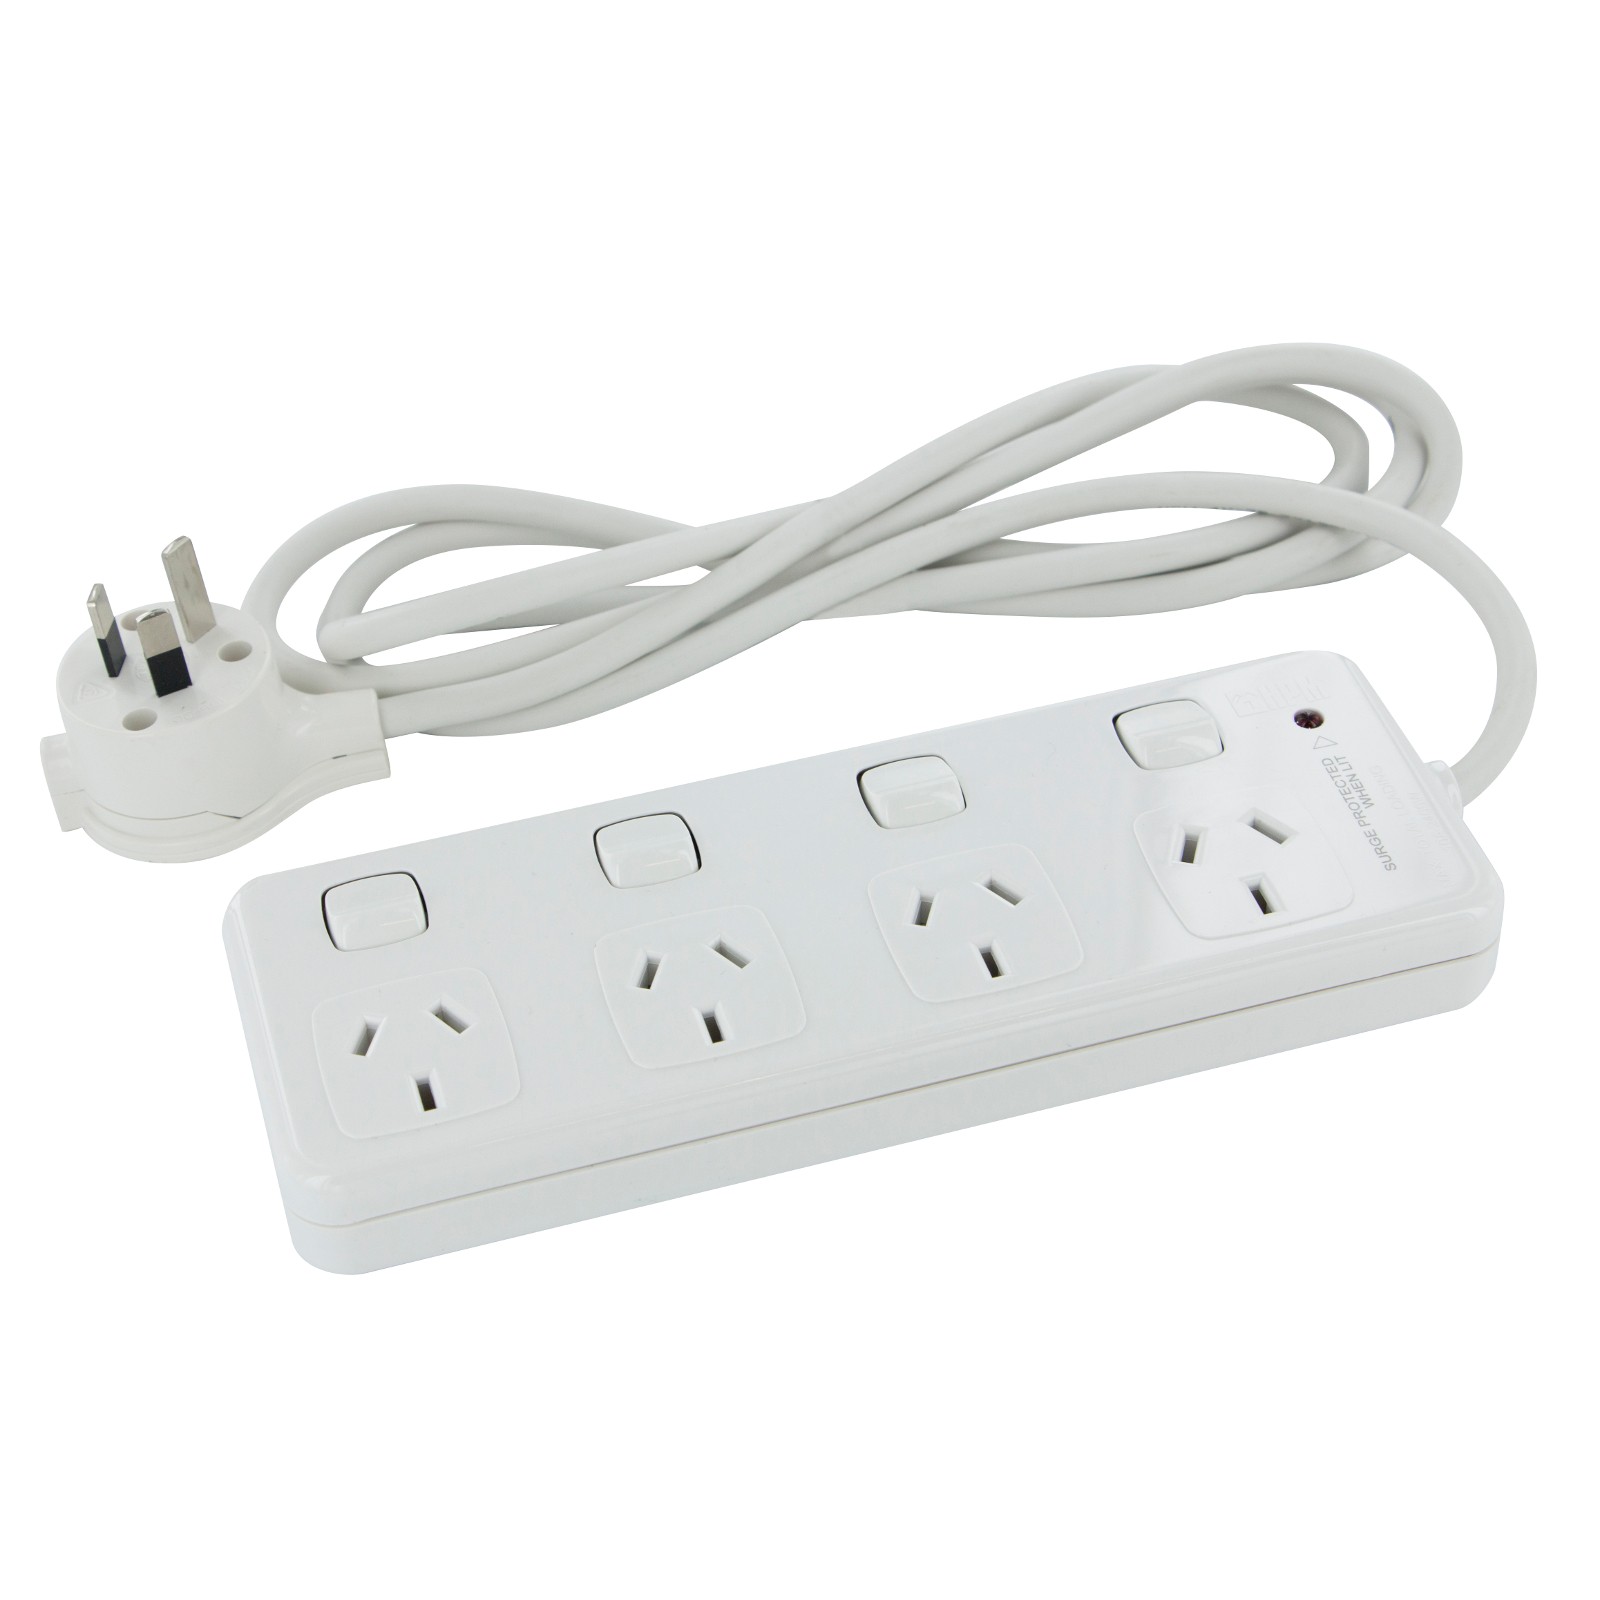 HPM 10 Amp 4 OUTLET SURGE PROTECTED POWERBOARD